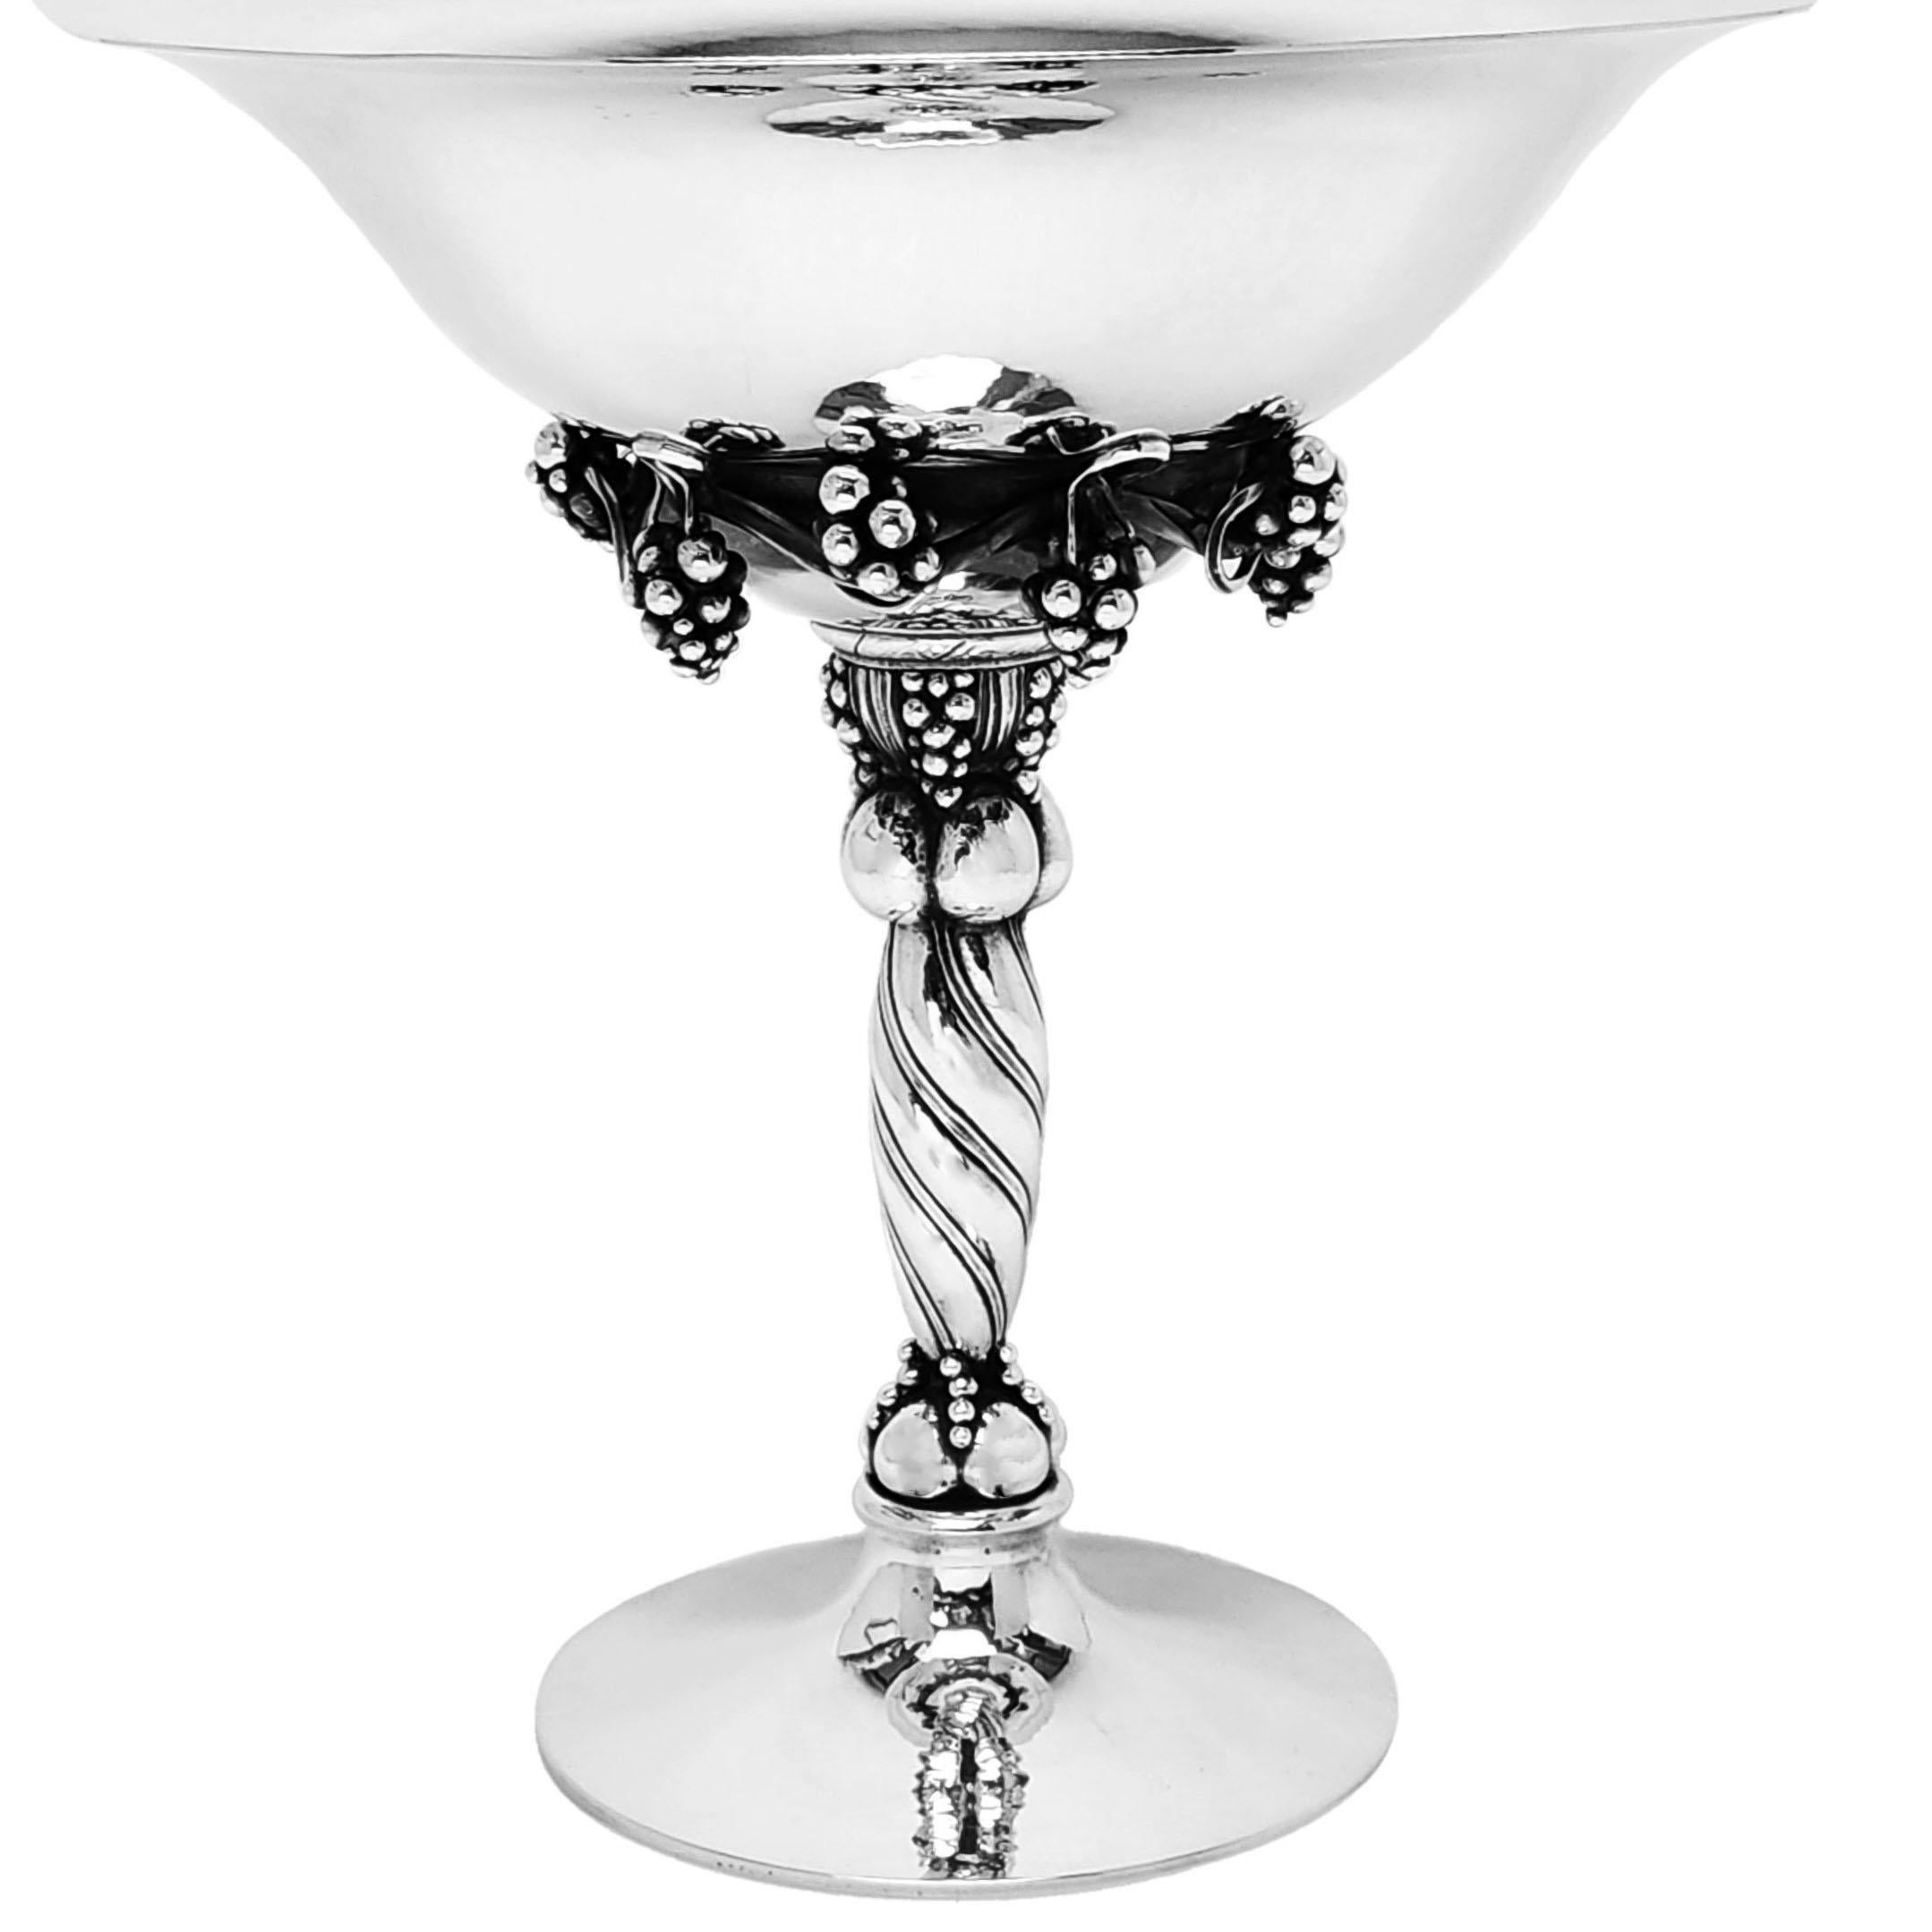 An magnificent vintage Georg Jensen Silver Compote in pattern no 264 A featuring an elegant grape design underneath a subtly hammered bowl. The Silver Bowl is supported on a twisted stem with a hammered spread foot.
 
Made in Copenhagen, Denmark in